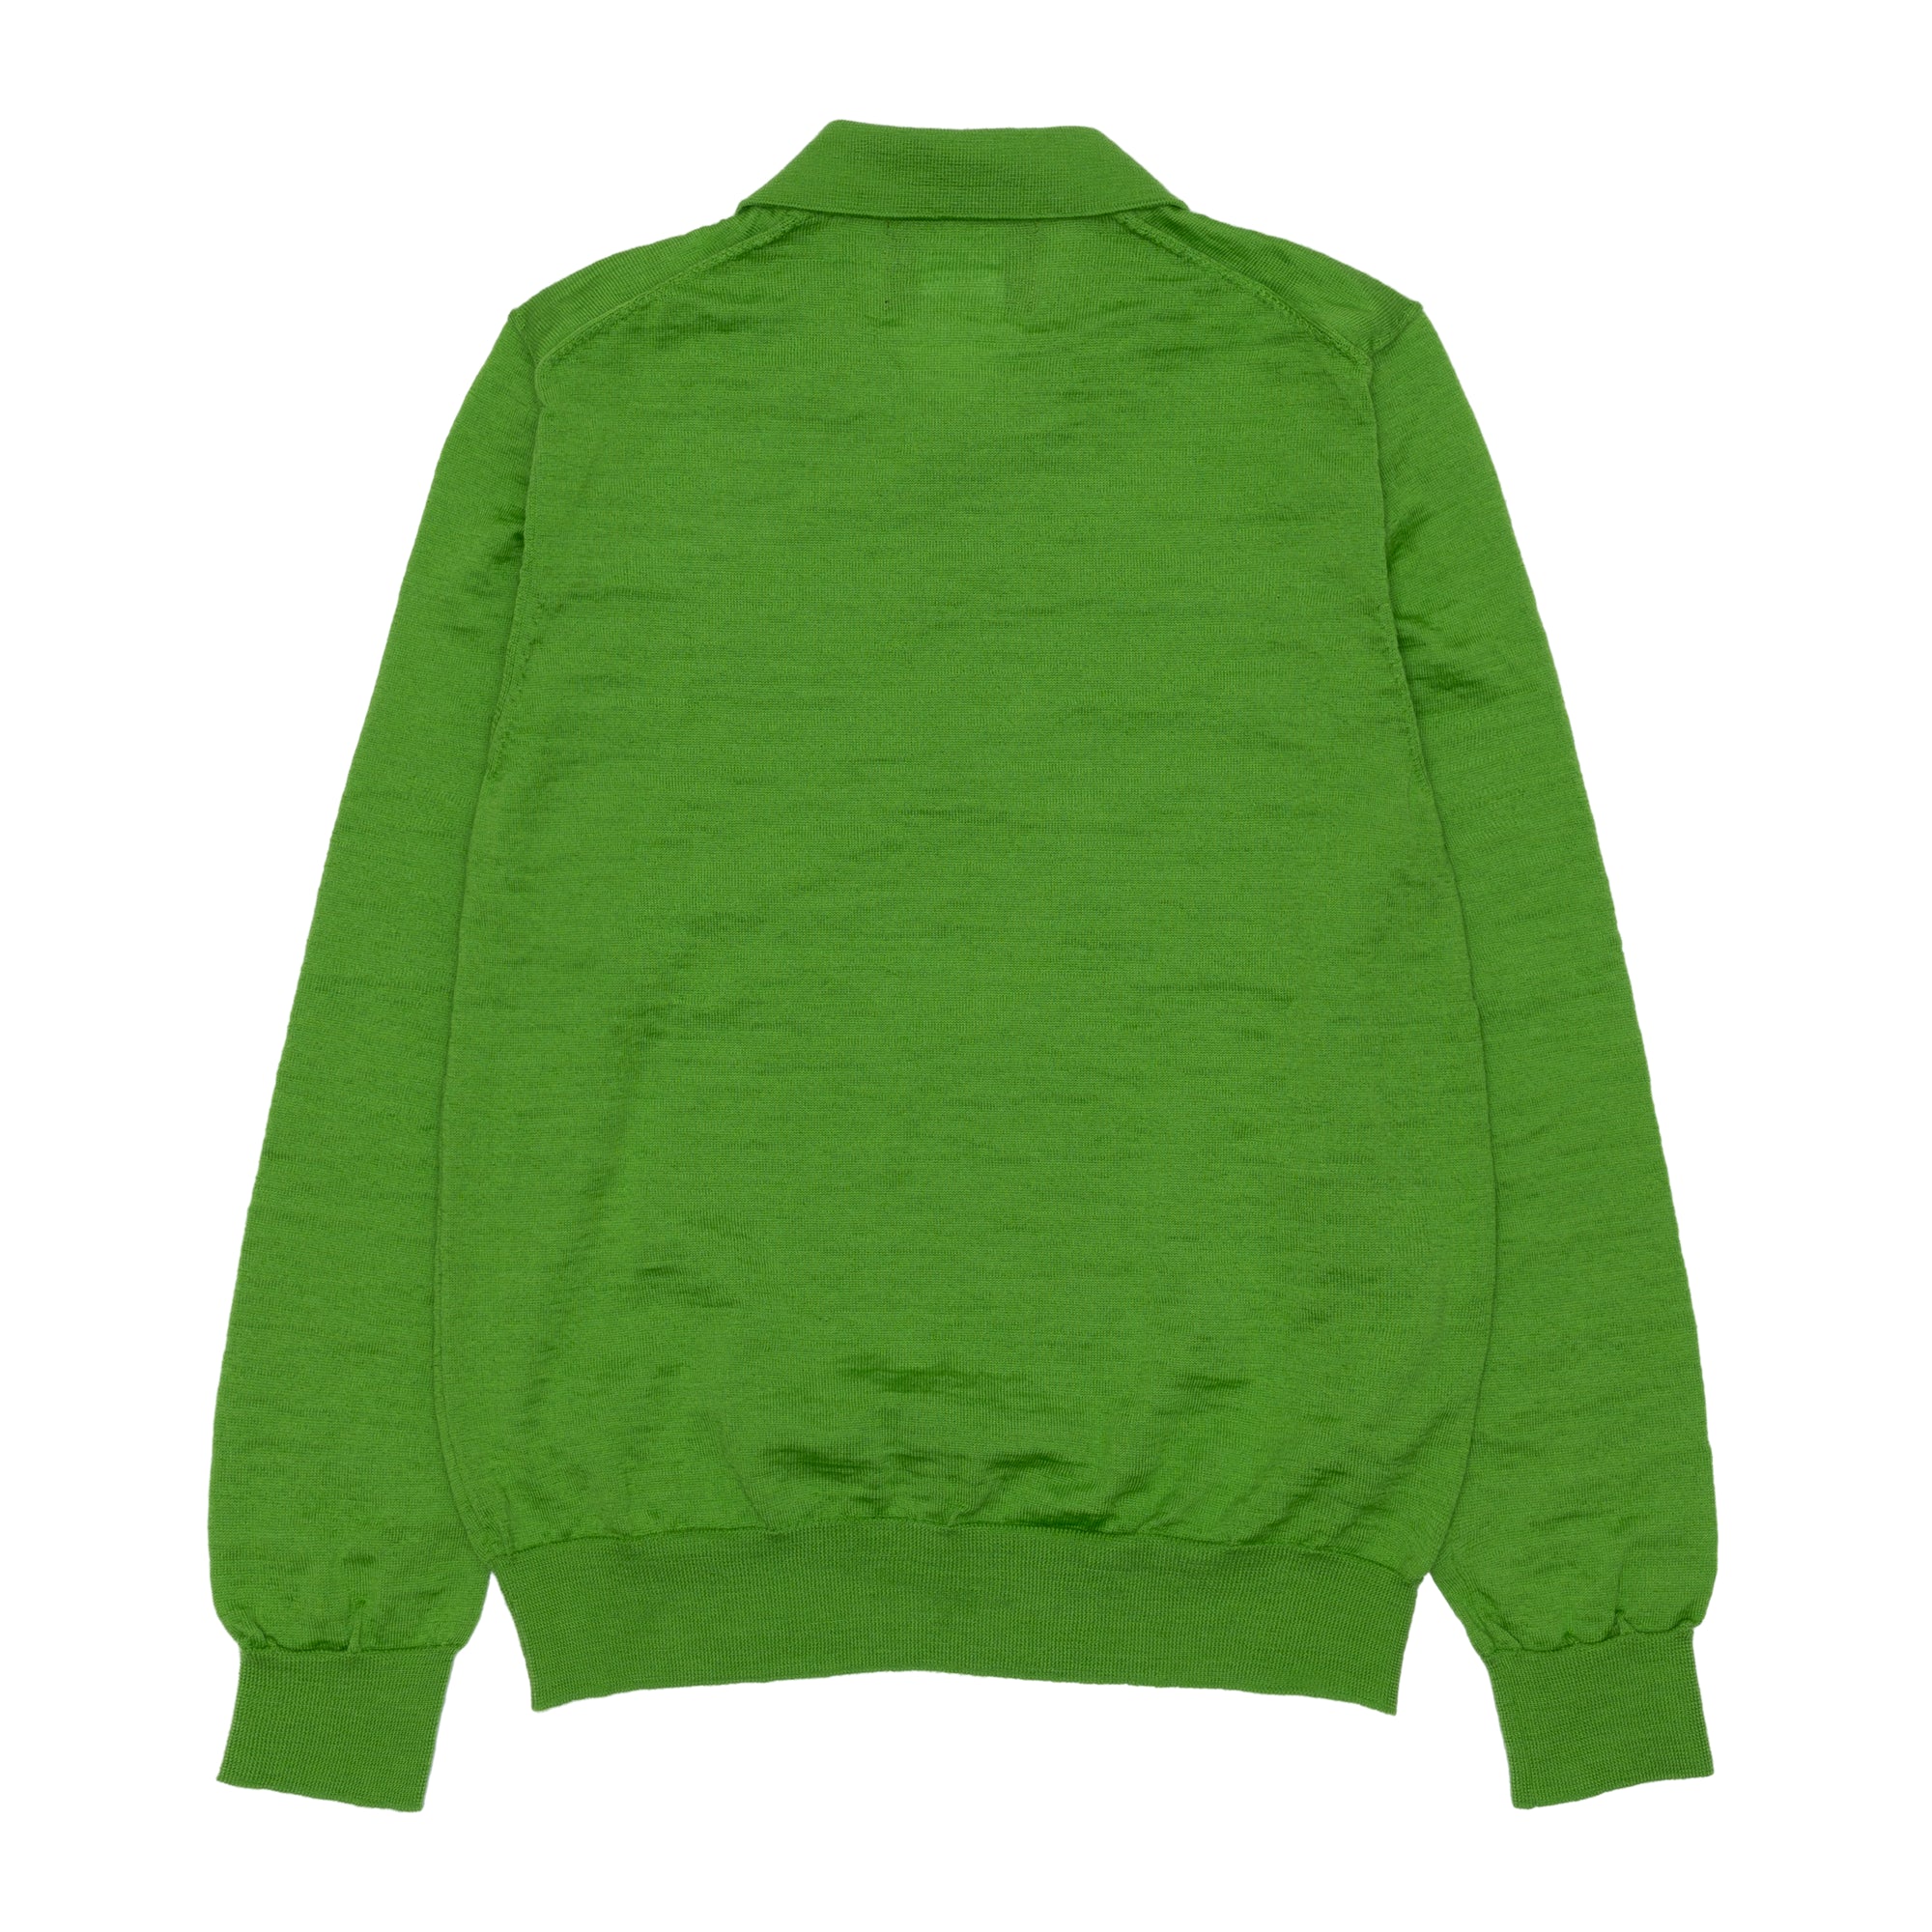 THE BEATLES CDG - One Point Knit Polo - (Green) view 2